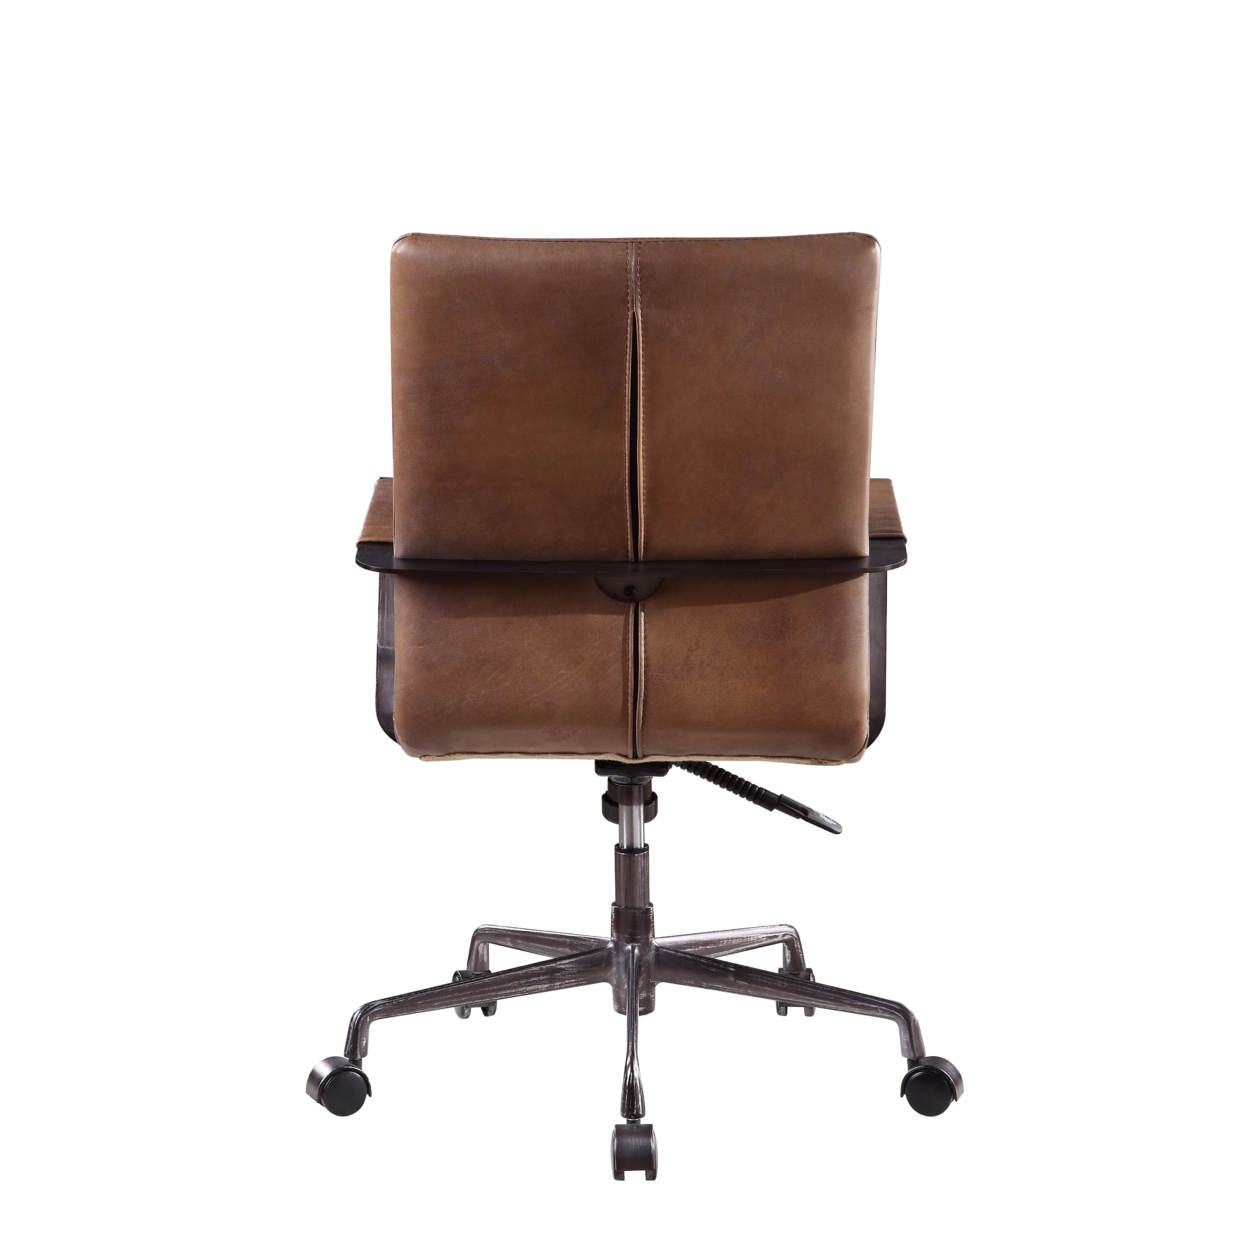 5 Star Base Faux Leather Upholstered Wooden Office Chair , Brown- Saltoro Sherpi